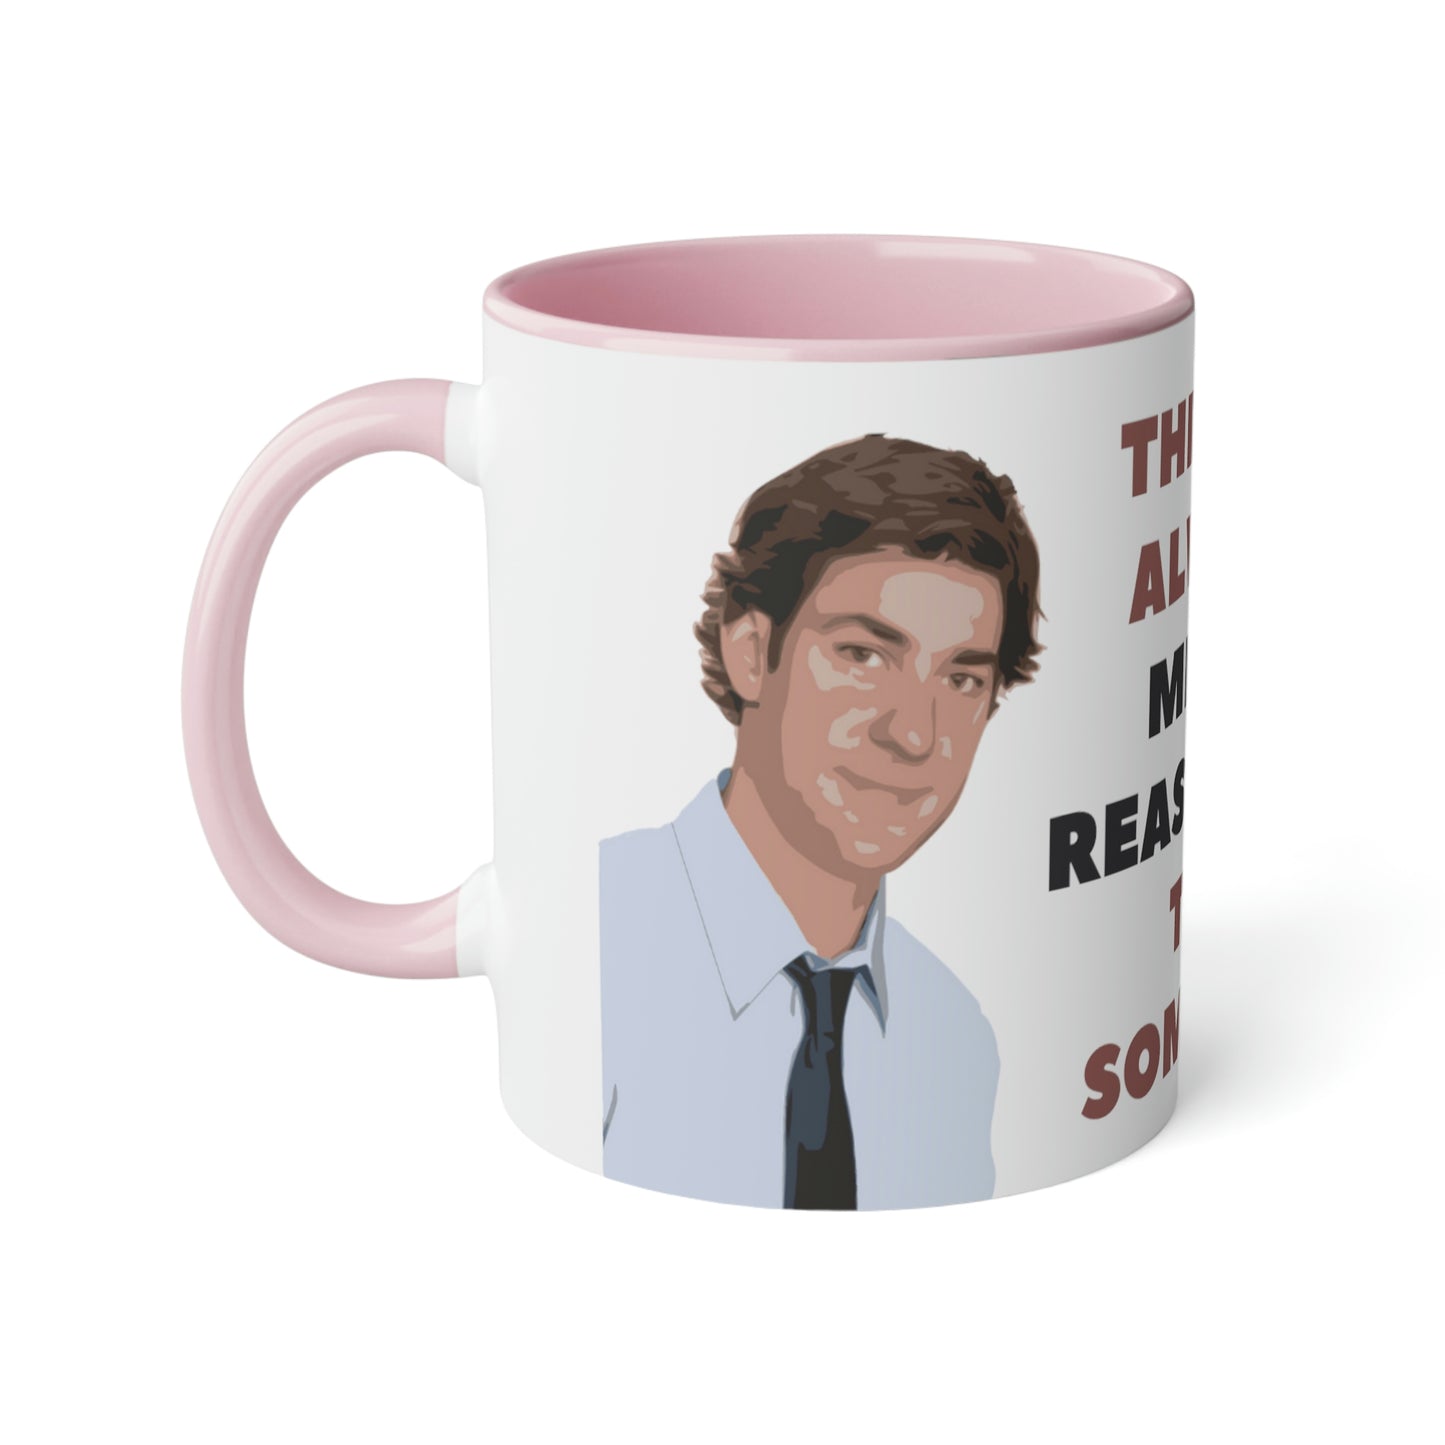 Meme Mug Dunder Mifflin workplace comedy - There are always a million reasons not to do something